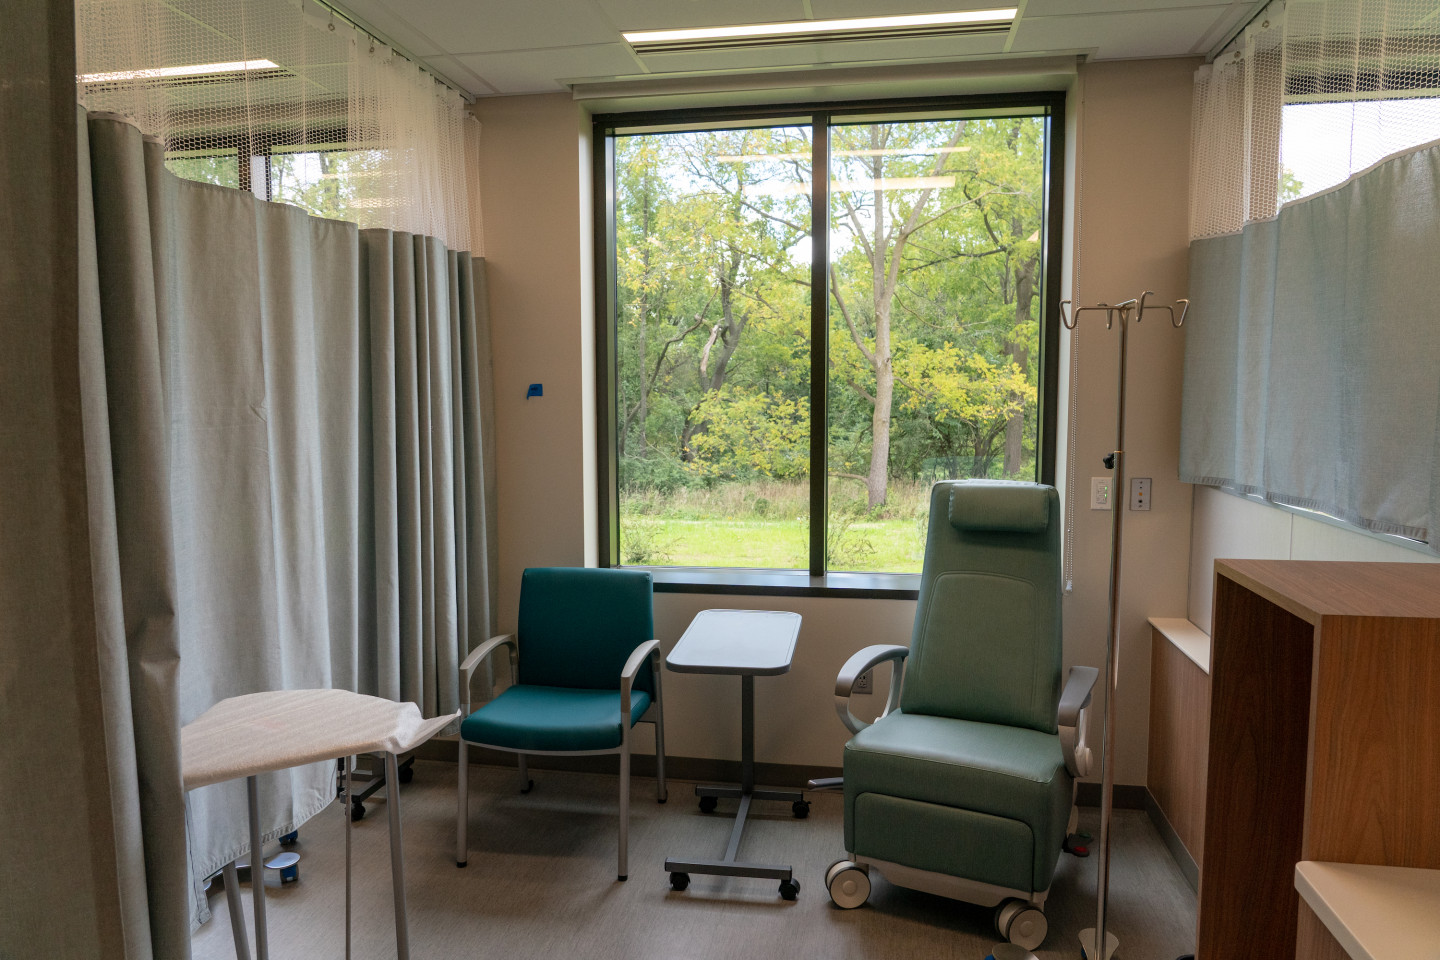 A patient and companion chair inside the Ascension Borgess Cancer Center.